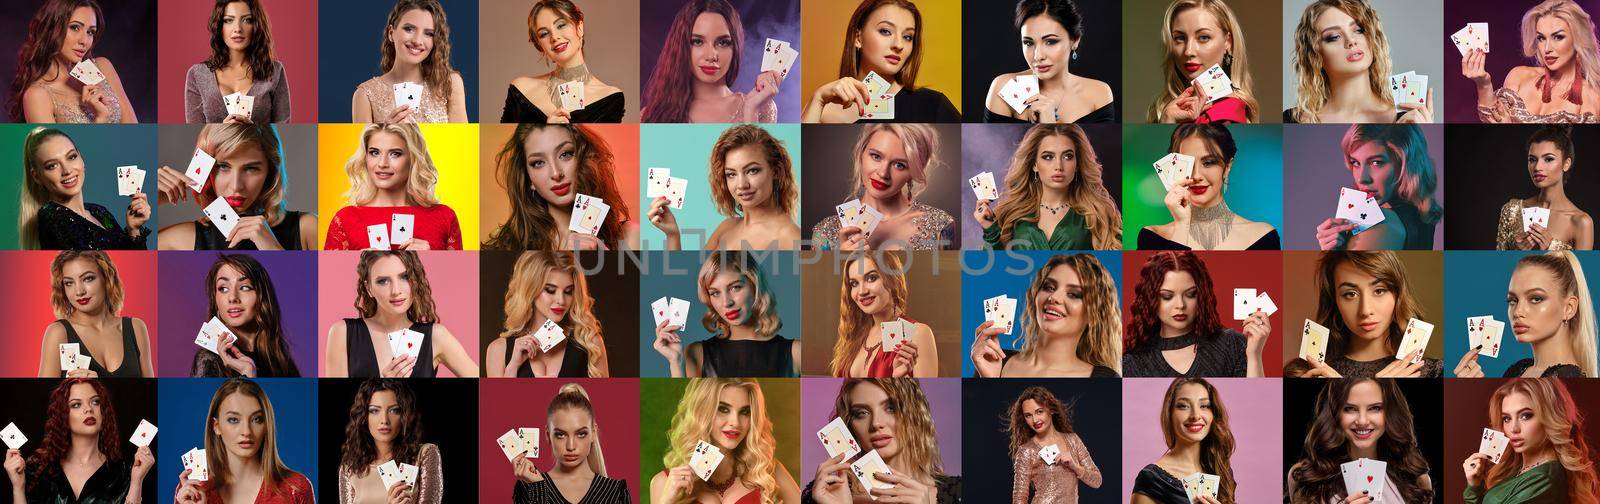 Collage of gorgeous models with bright make-up and hairstyles, in stylish dresses and jewelry. They showing playing cards while posing against colorful backgrounds. Gambling, poker, casino. Close-up